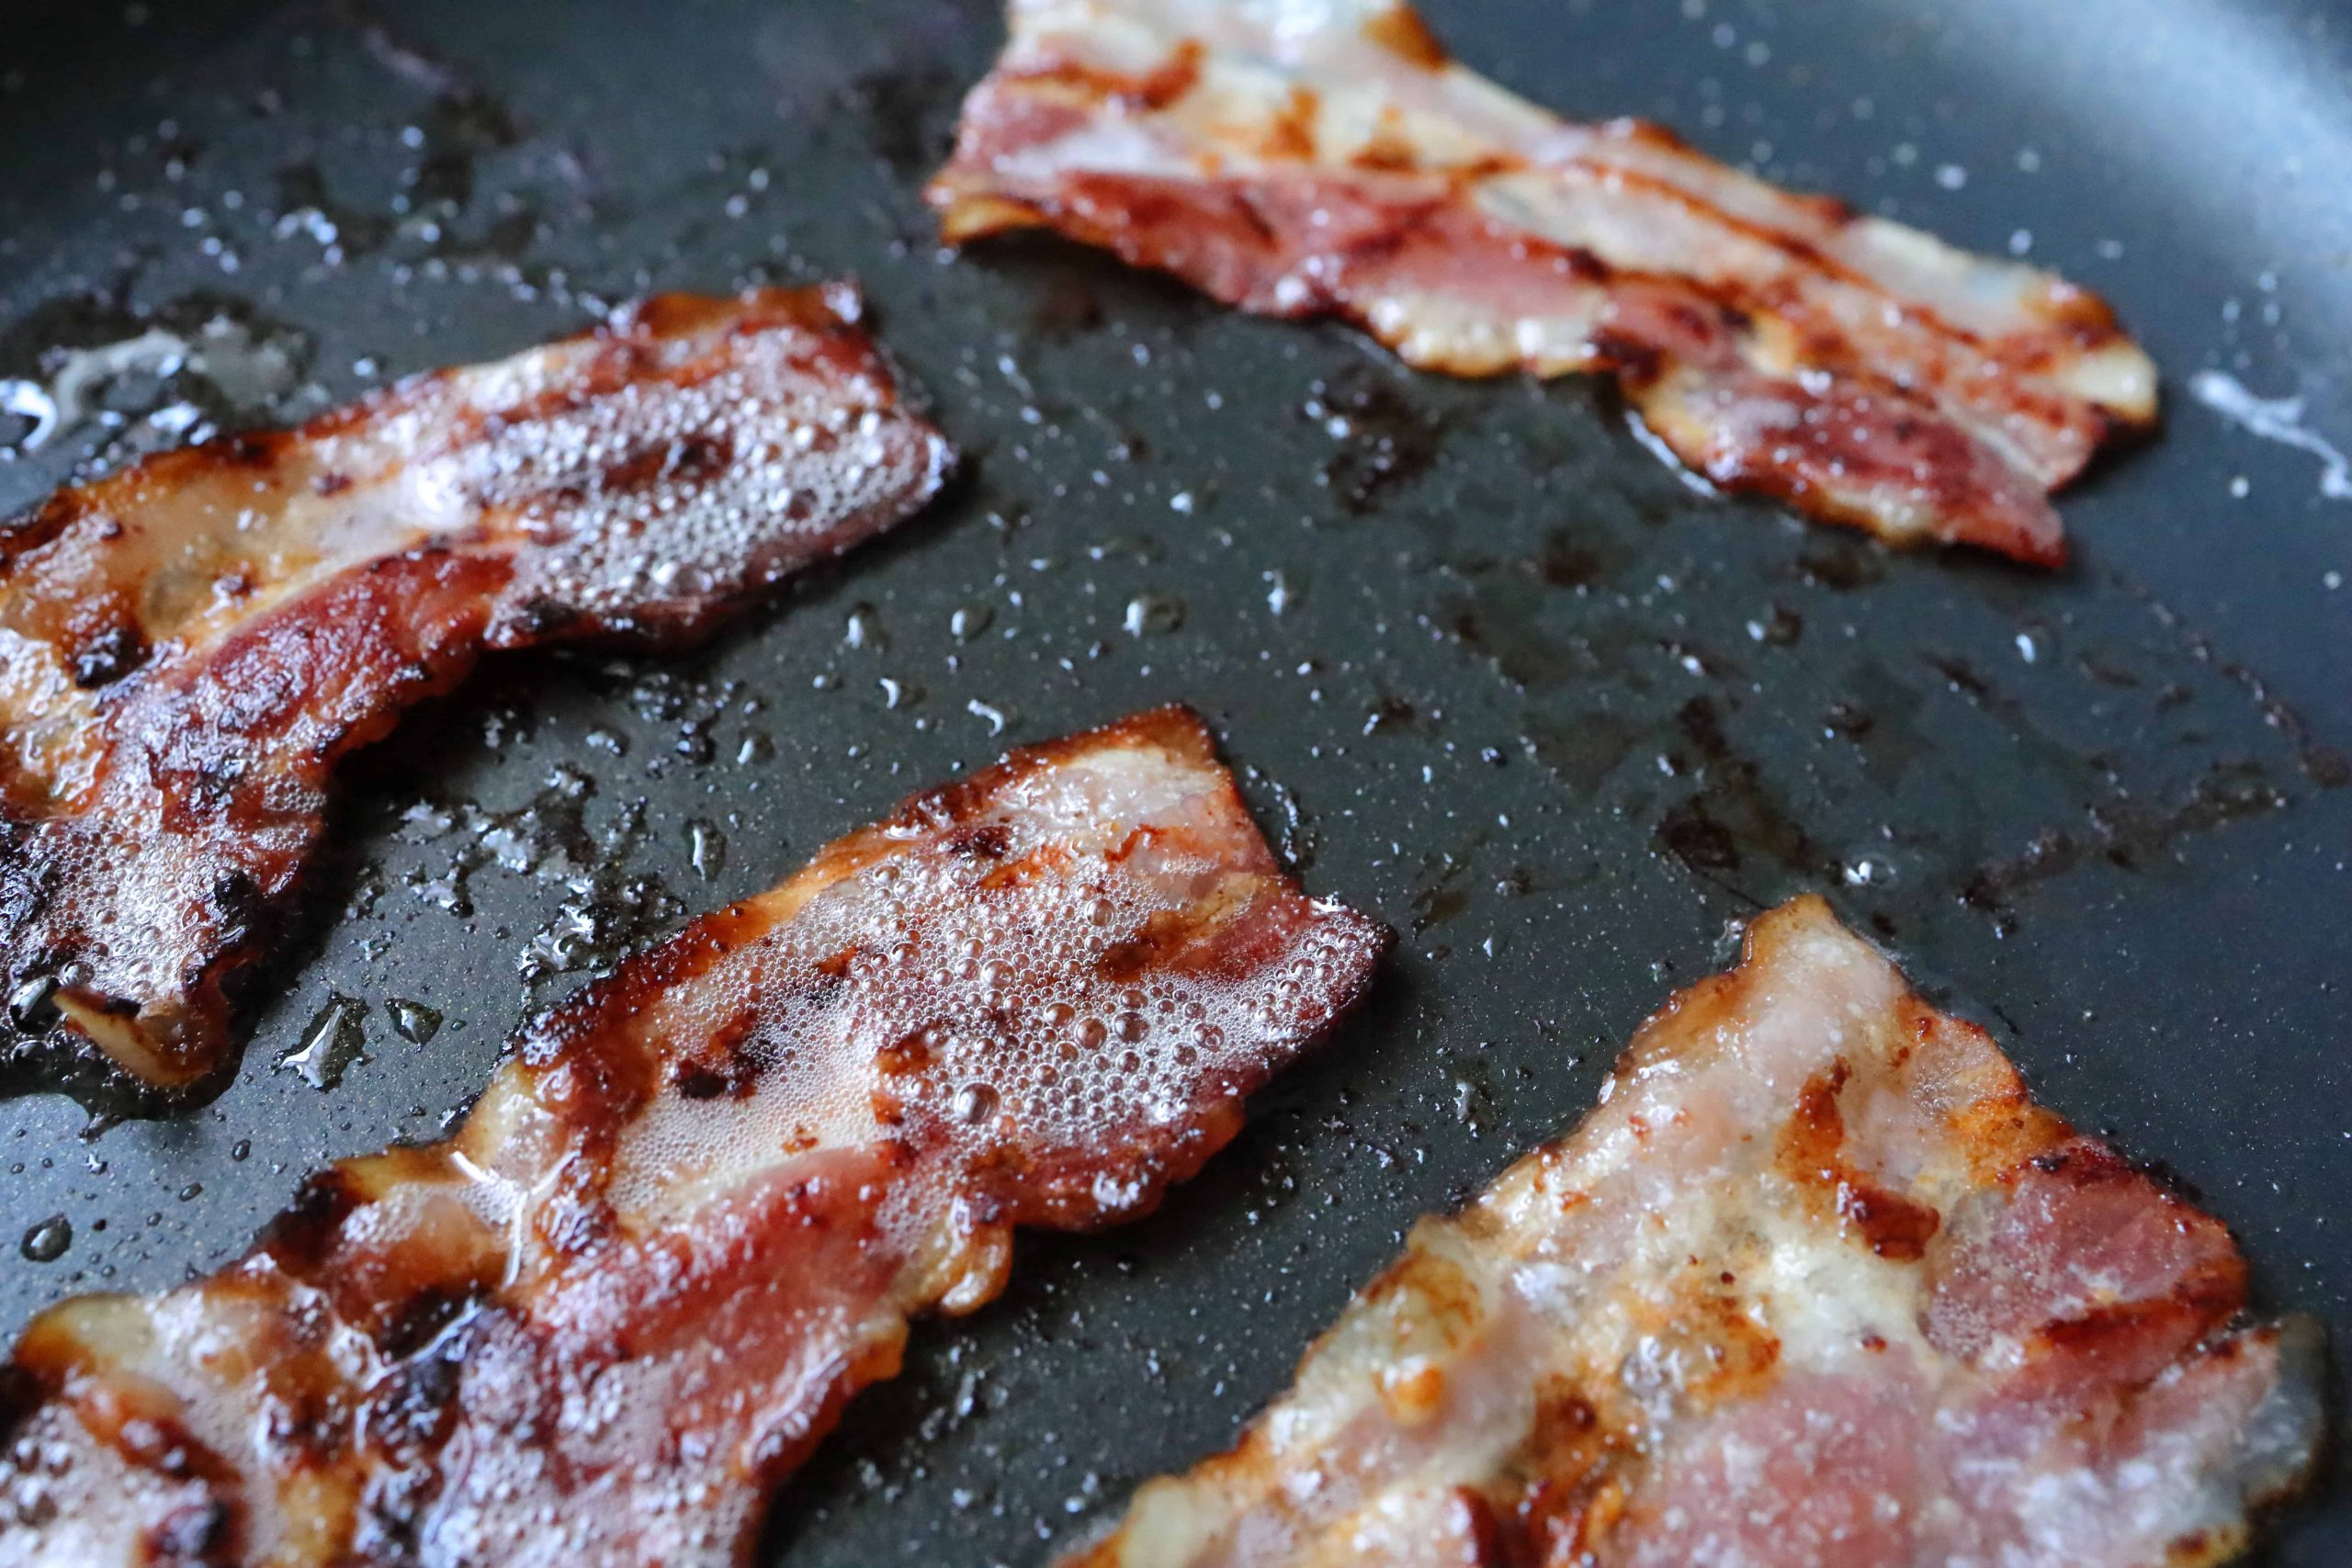 Bacon slices in the pan